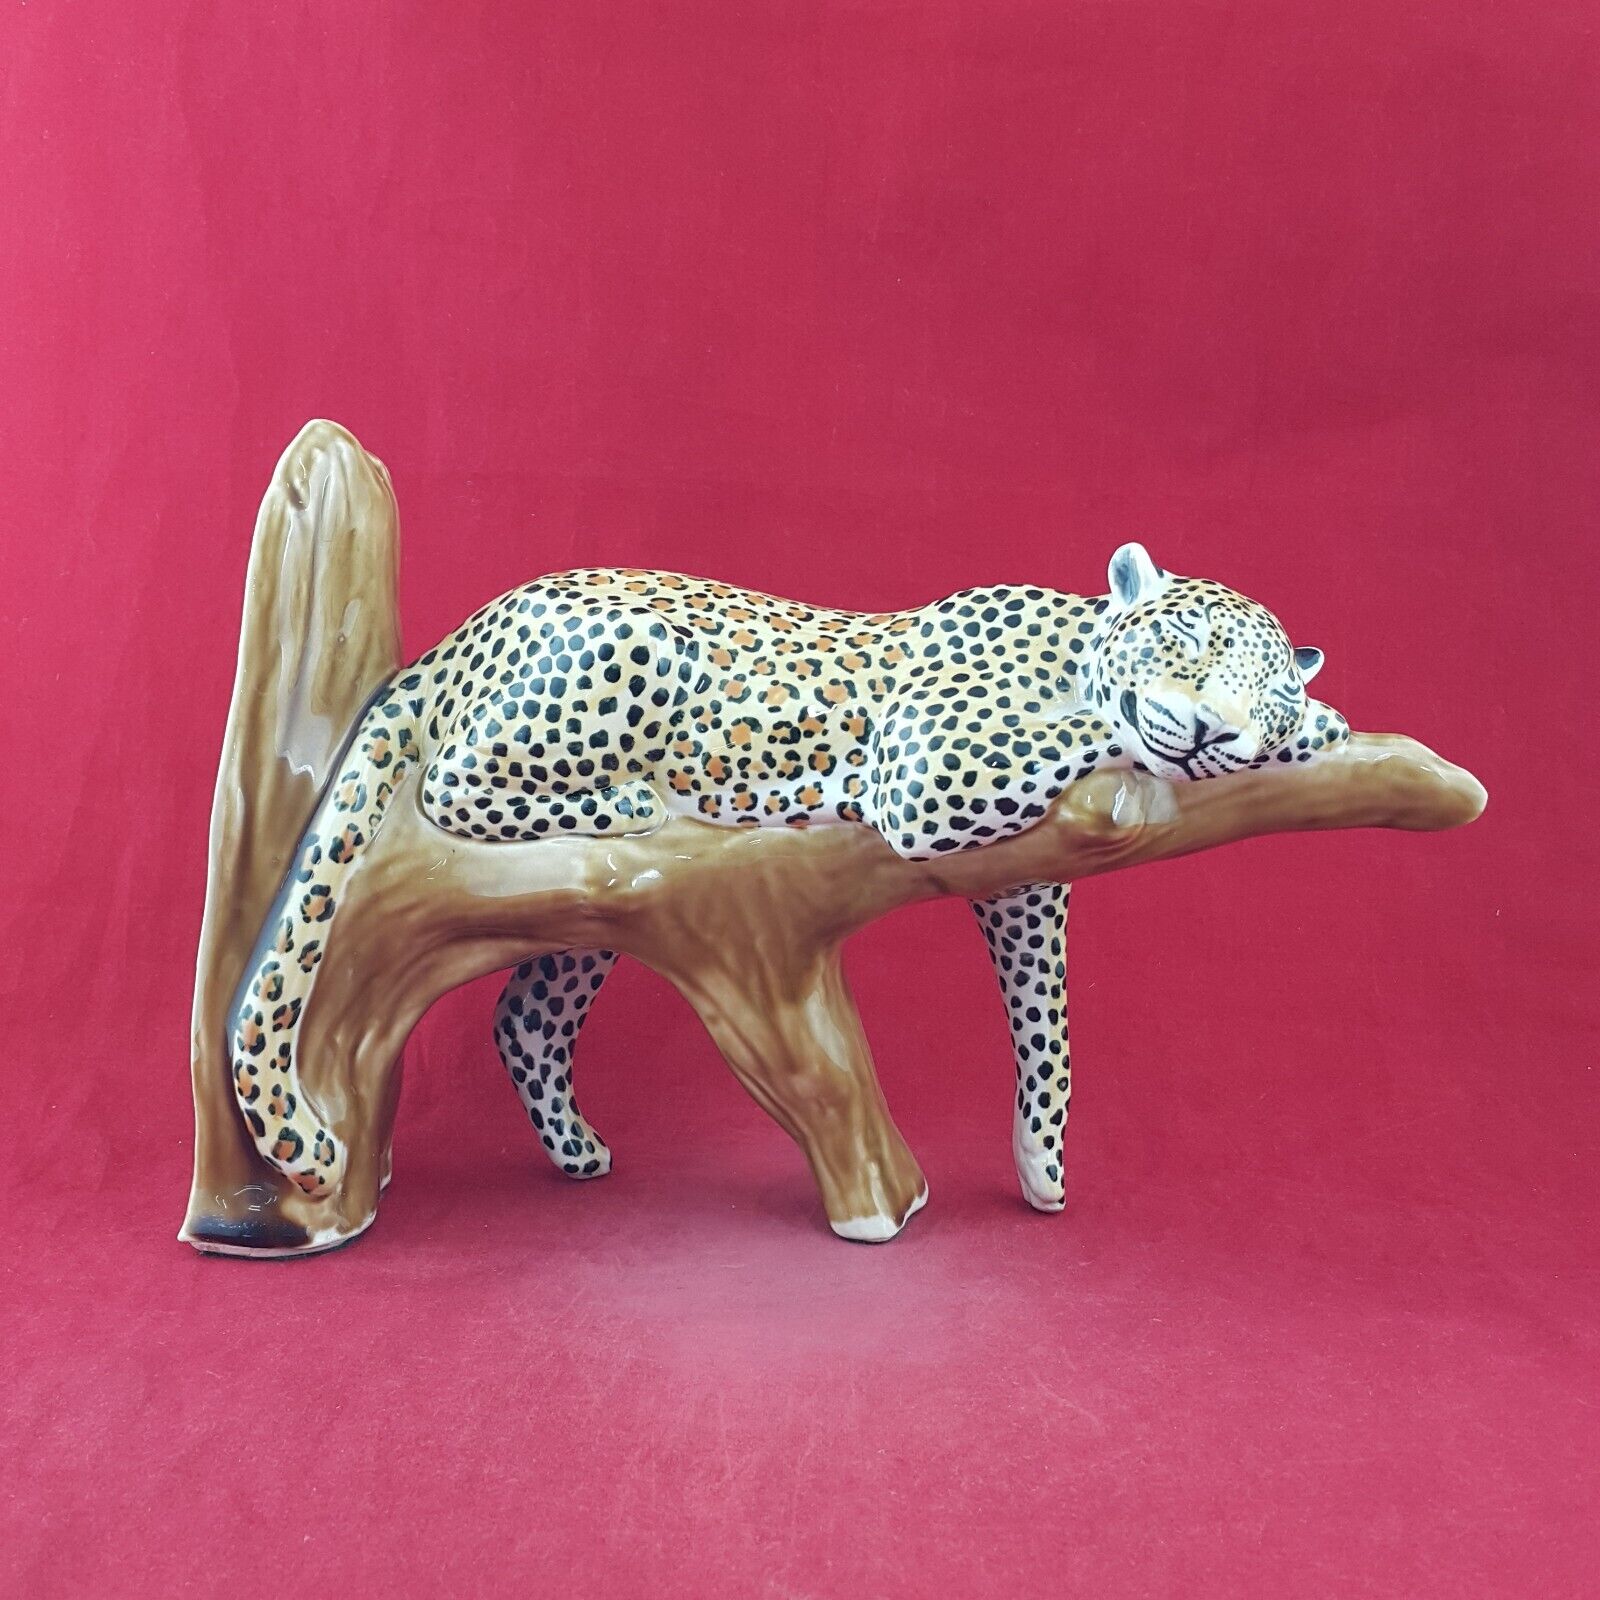 Clare Mcfarlane Hand Painted Leopard on Trunk - 8864 O/A